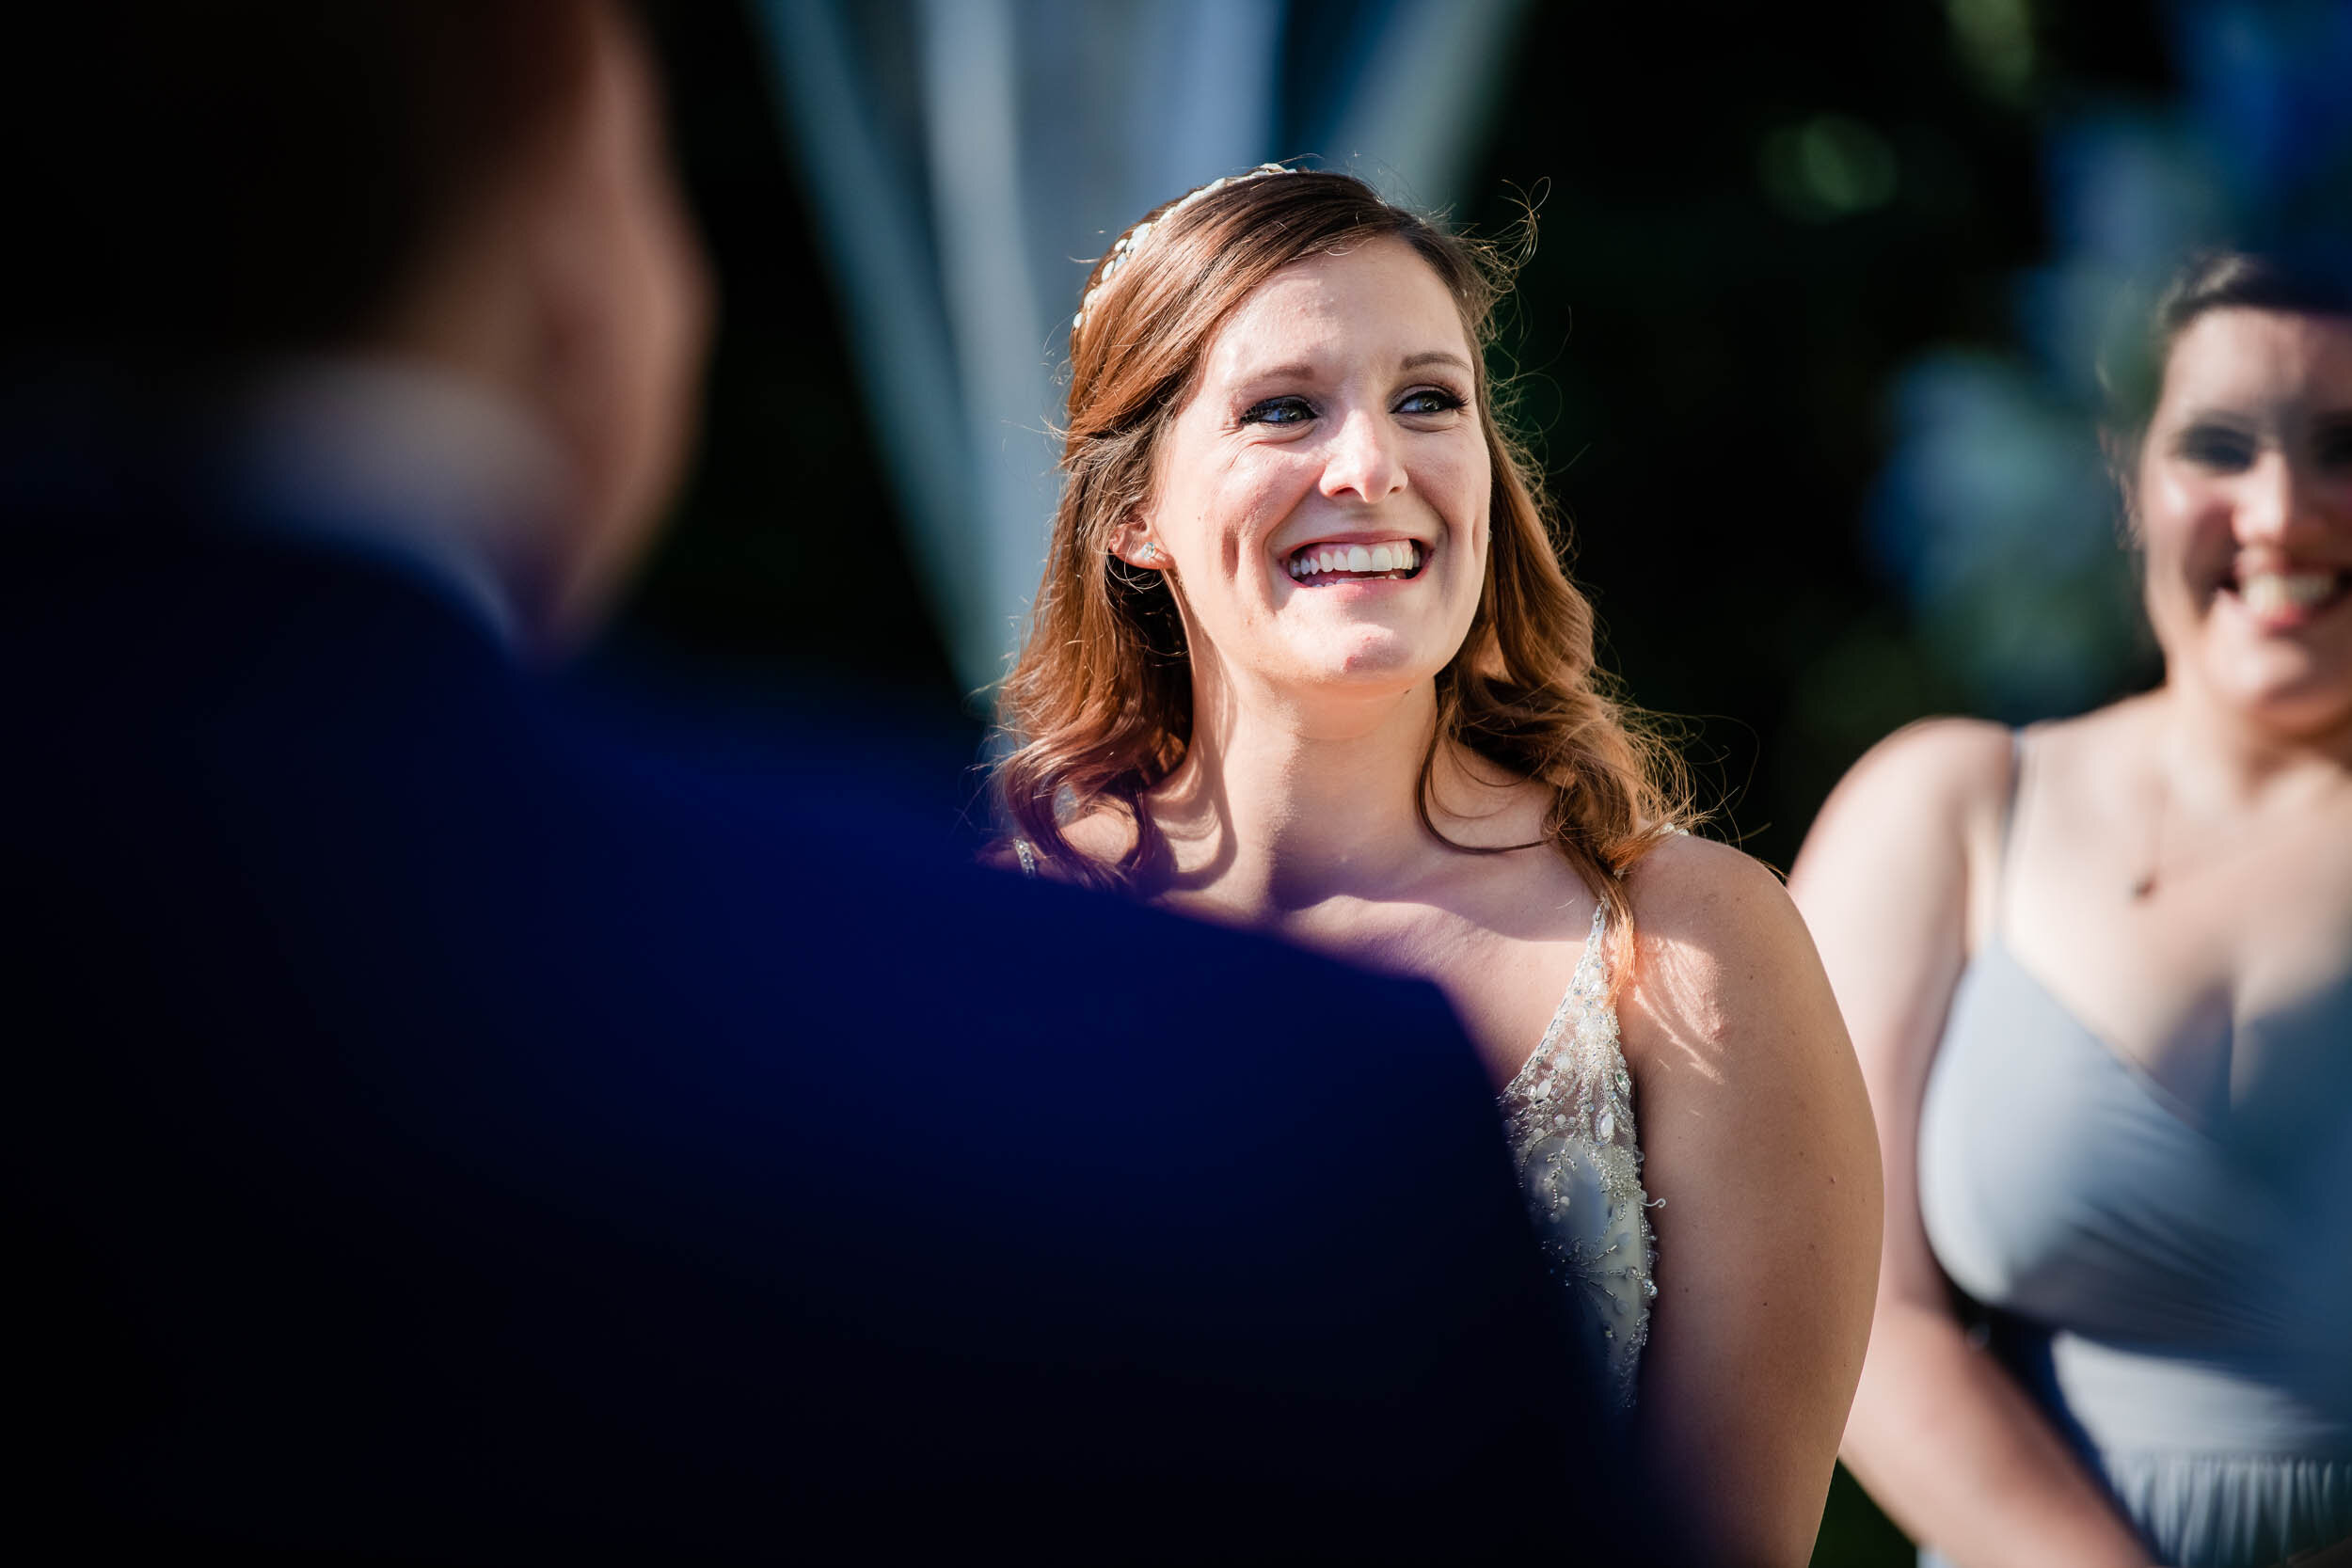 Bride laughs during the ceremony:  Chicago backyard wedding photographed by J. Brown Photography.